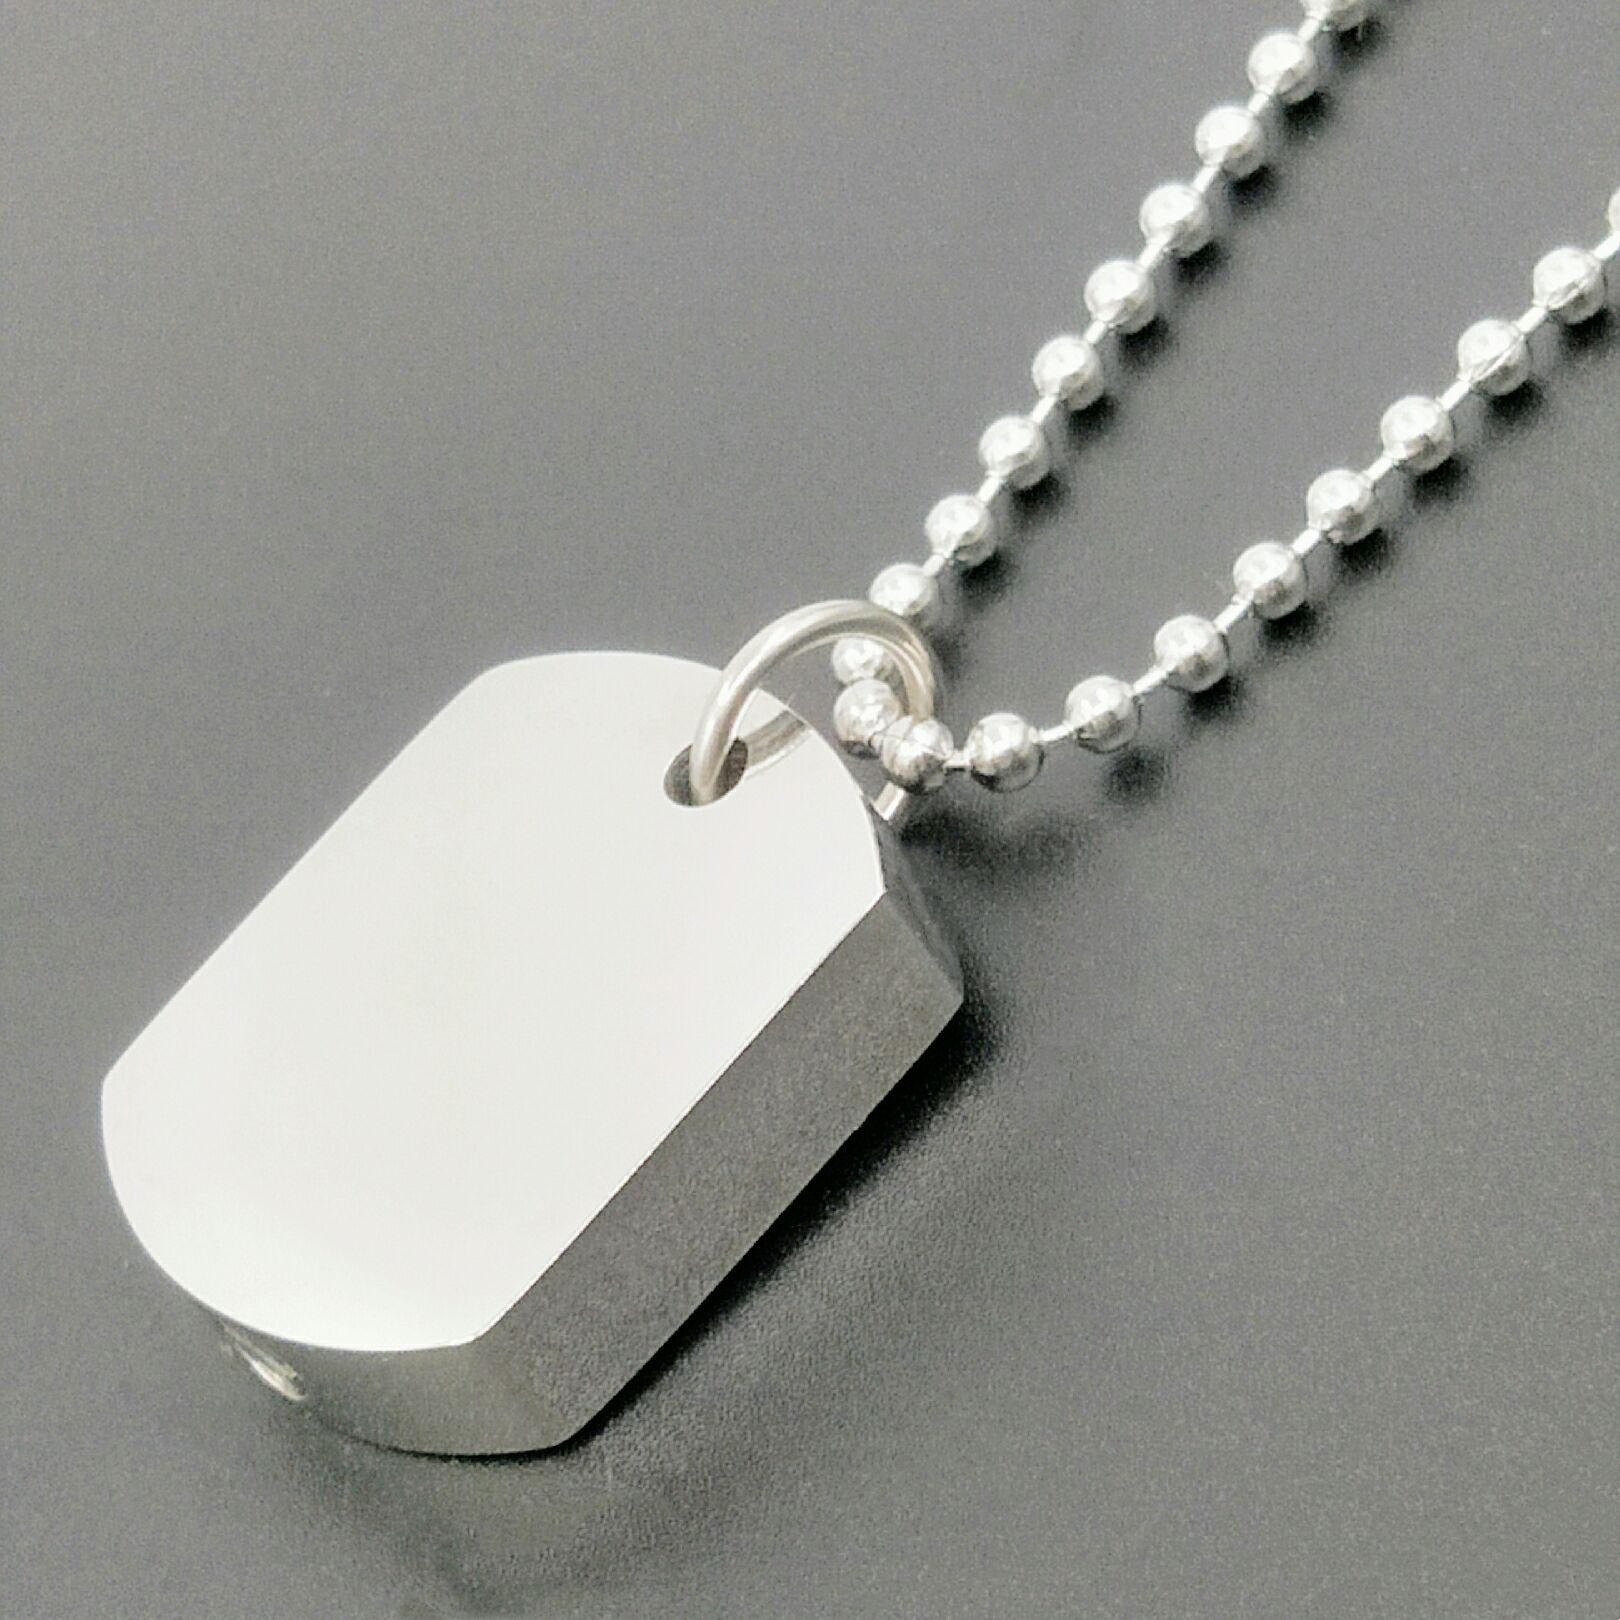 Single pendant without chain